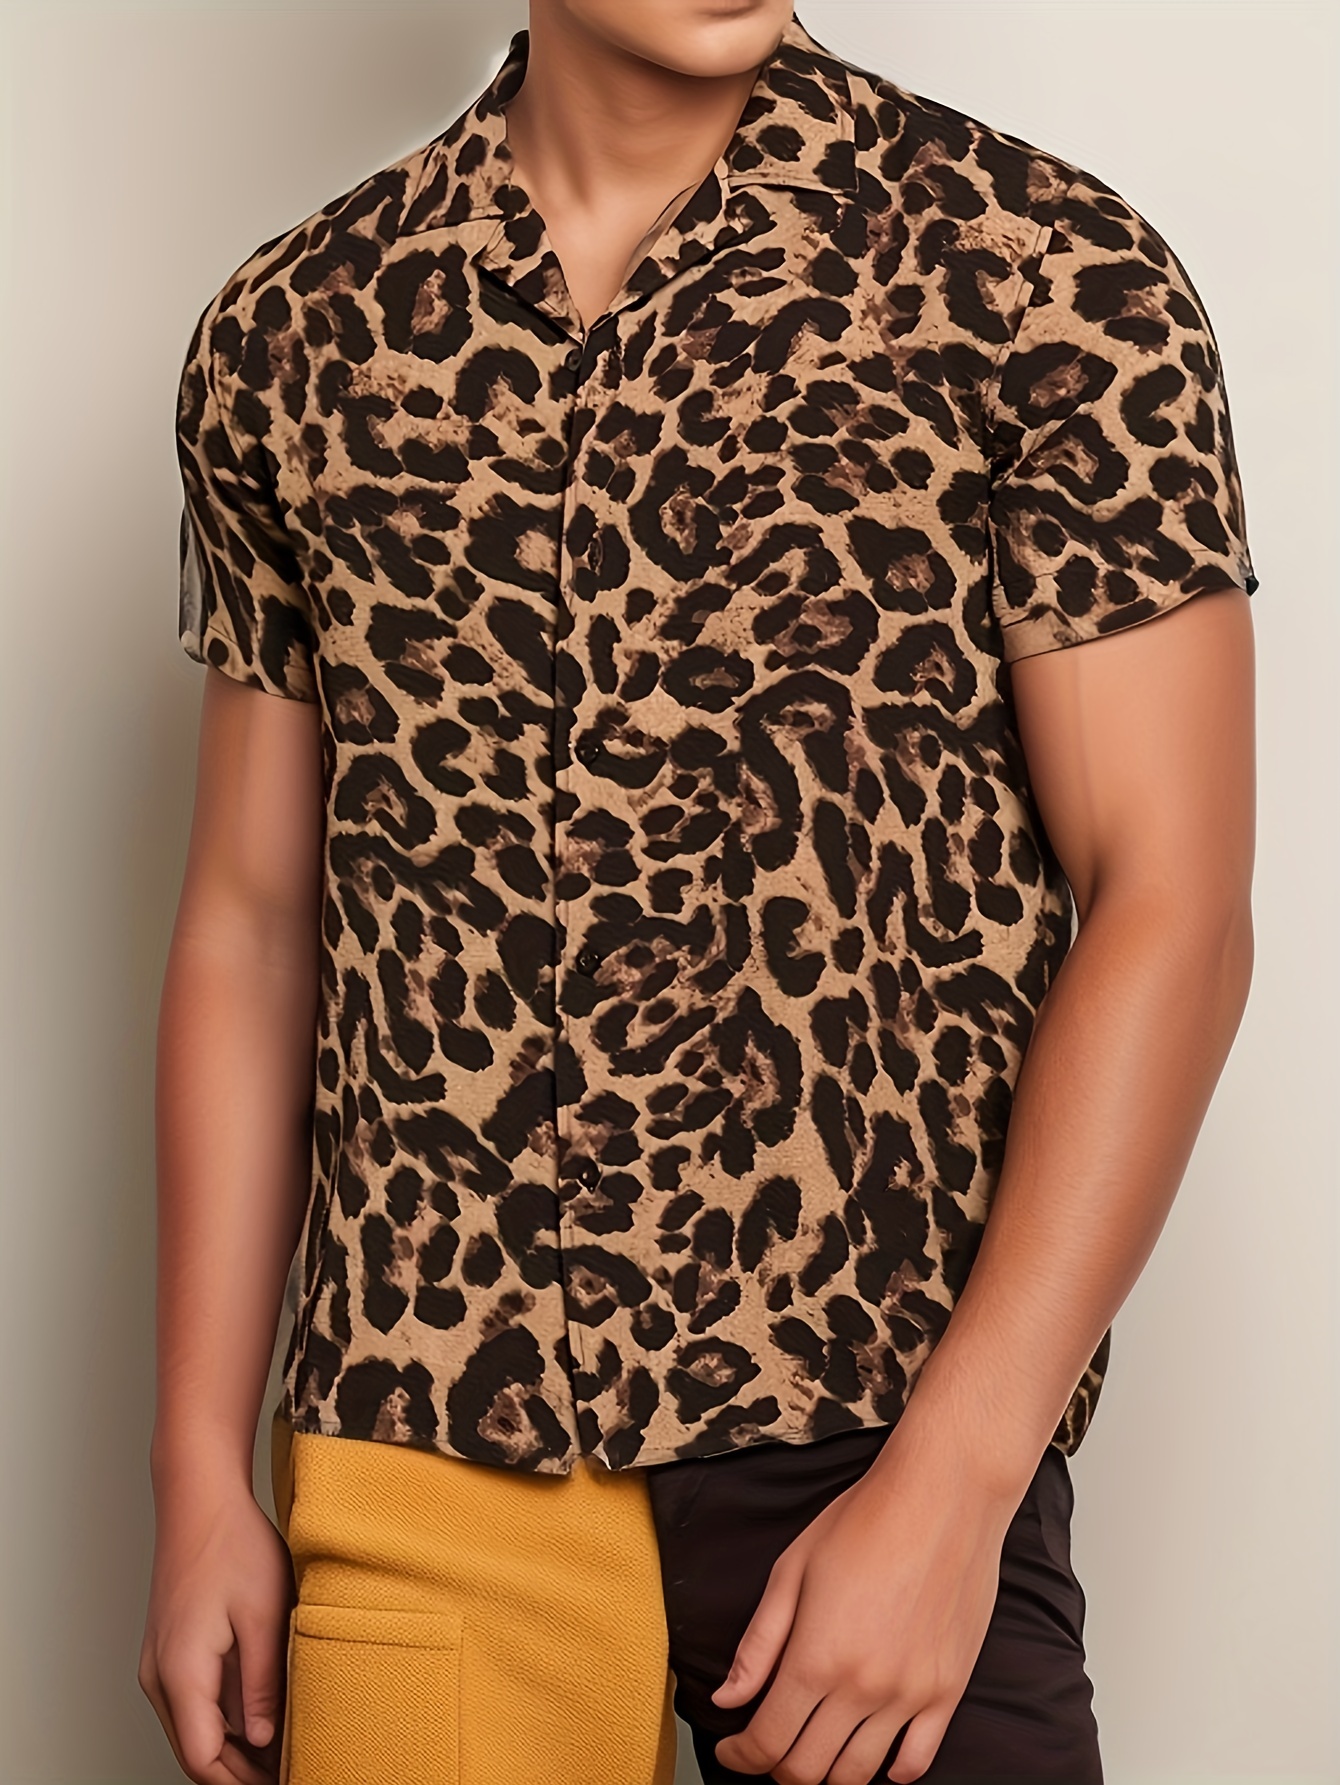 Men's Leopard Print Shirt With Chest Pocket, Casual Lapel Button Up Short  Sleeve Shirt For Outdoor